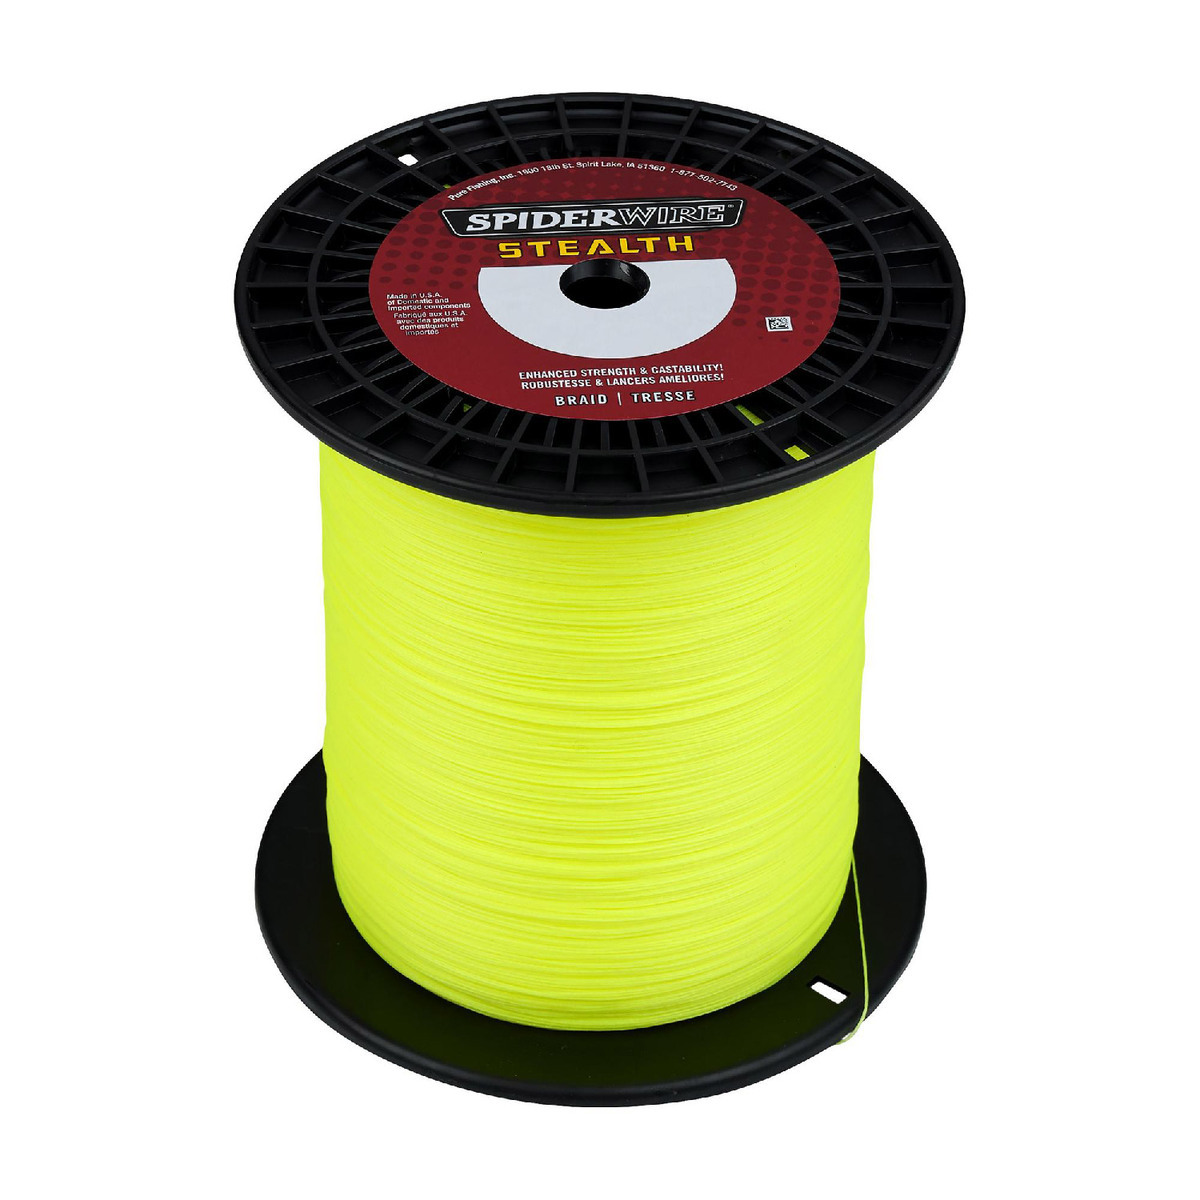 SpiderWire Stealth Braided Fishing Line - 30lb, Hi-Vis Yellow